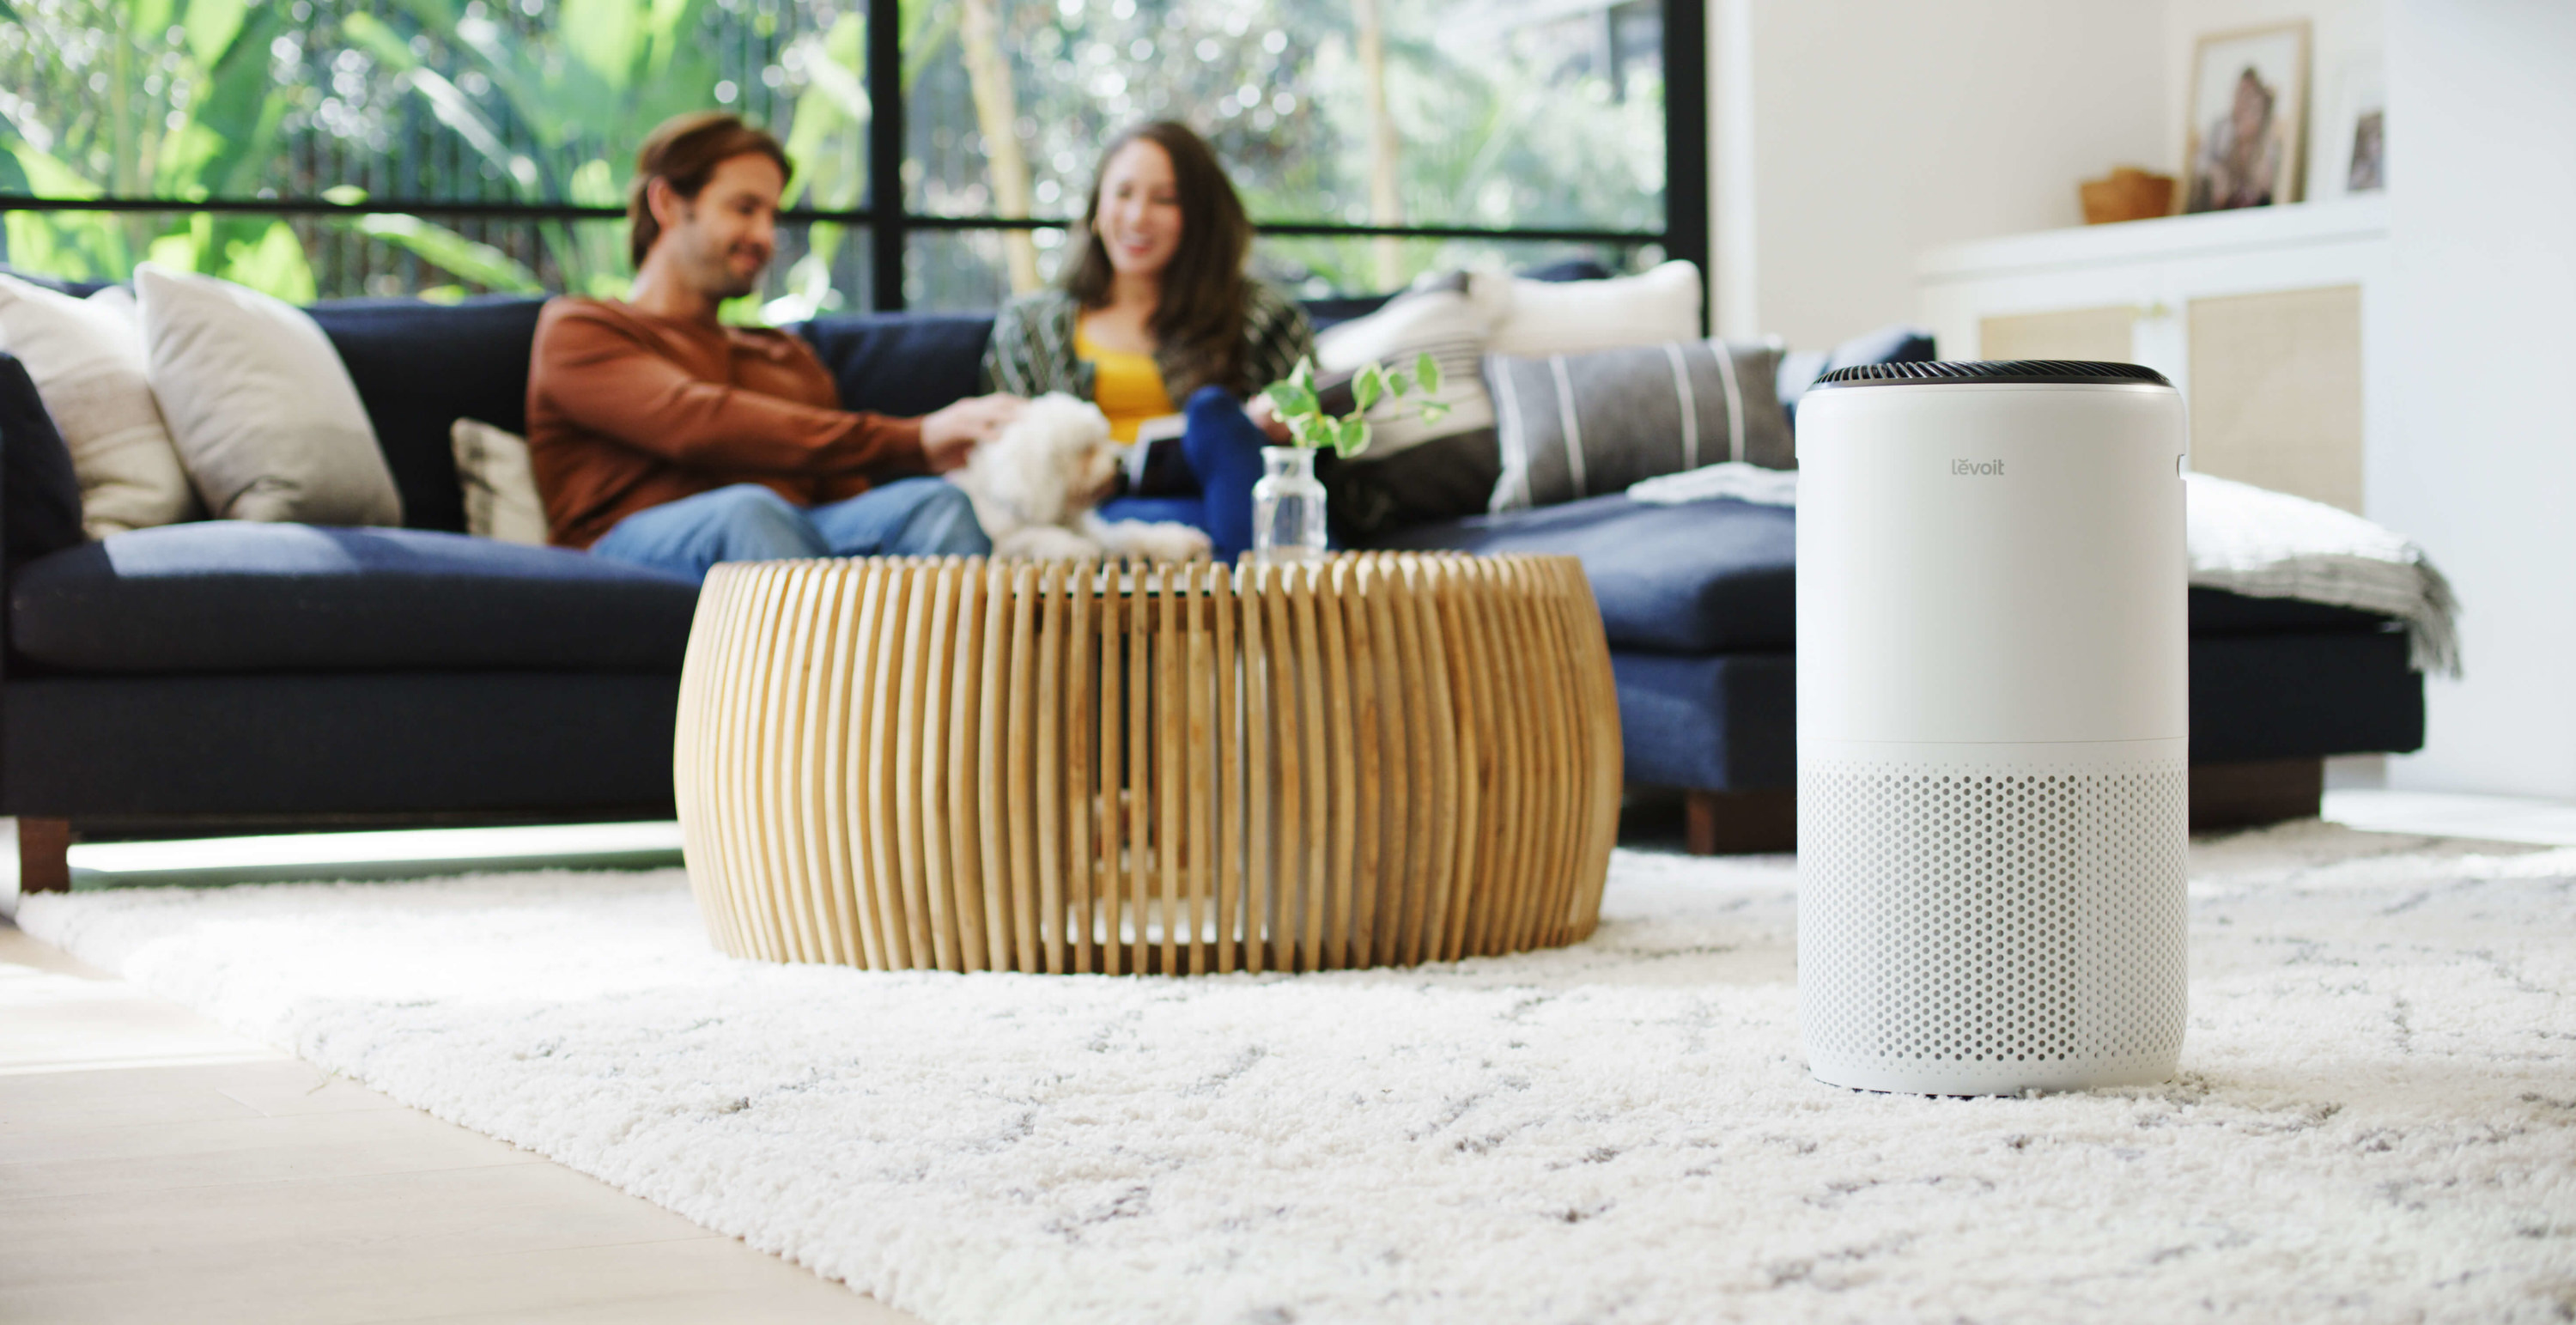 Two people relaxing on the couch as the air purifier runs nearby